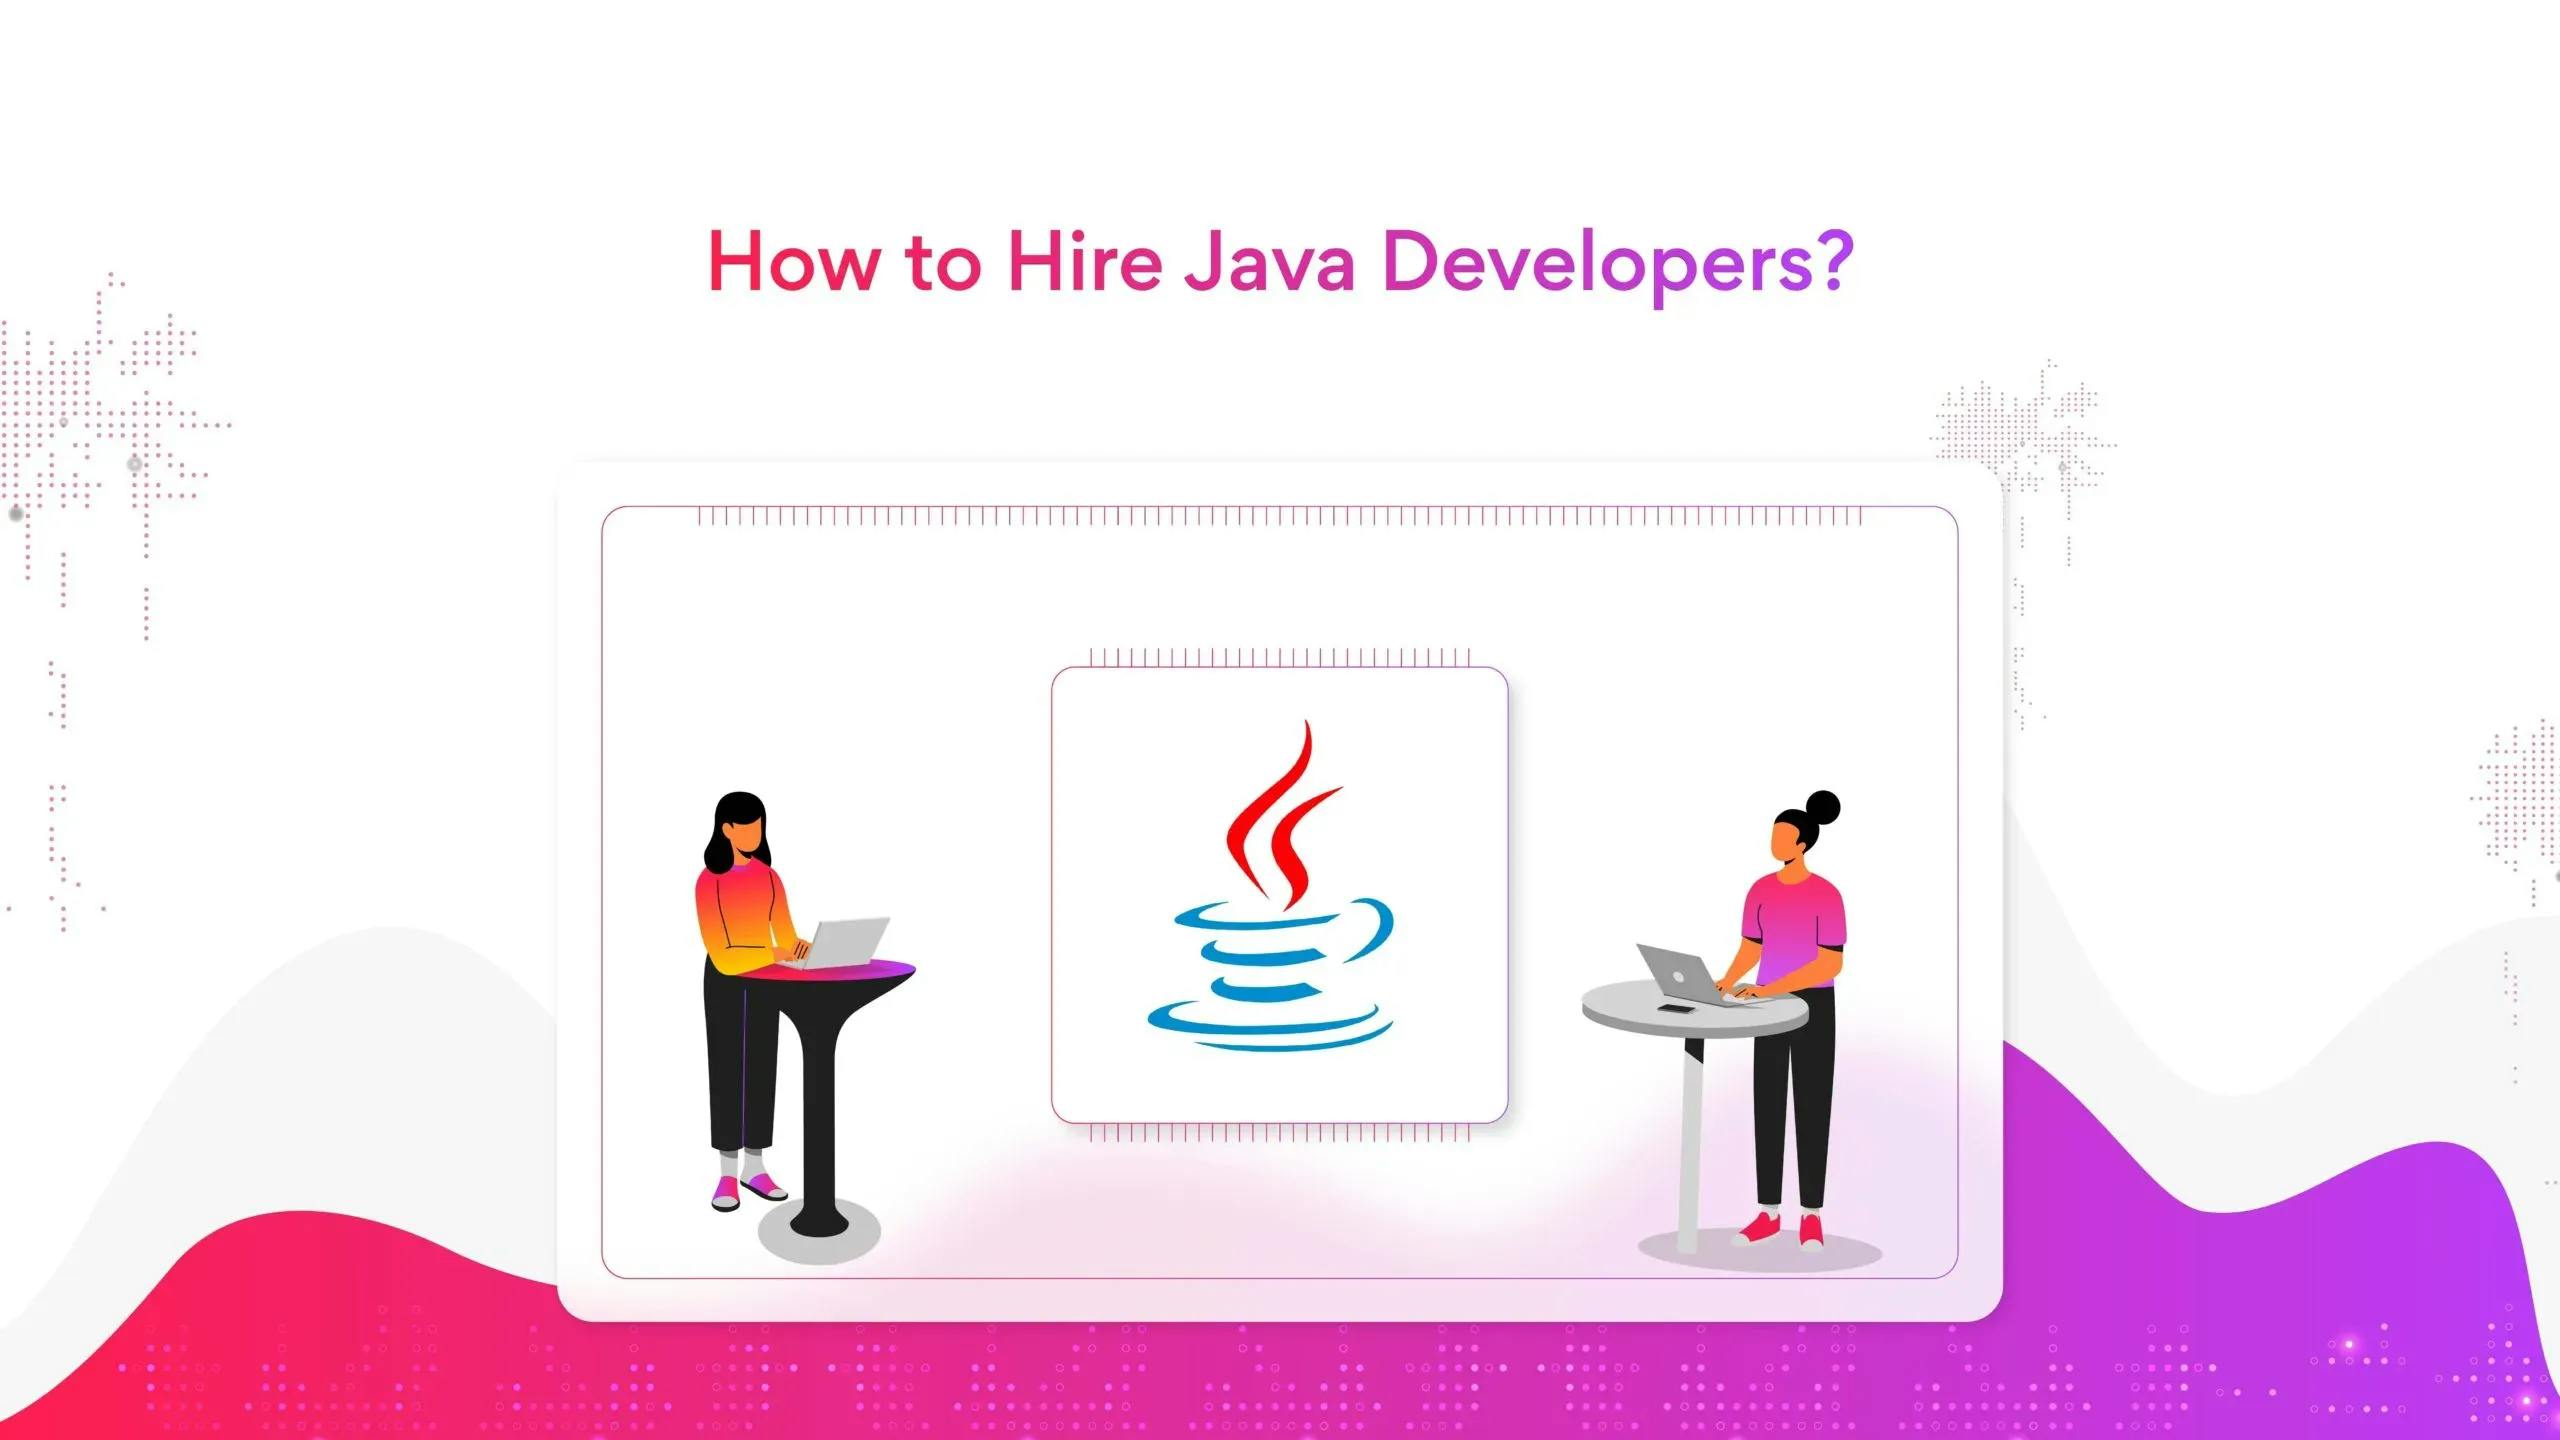 Hire Java Developers with These Steps